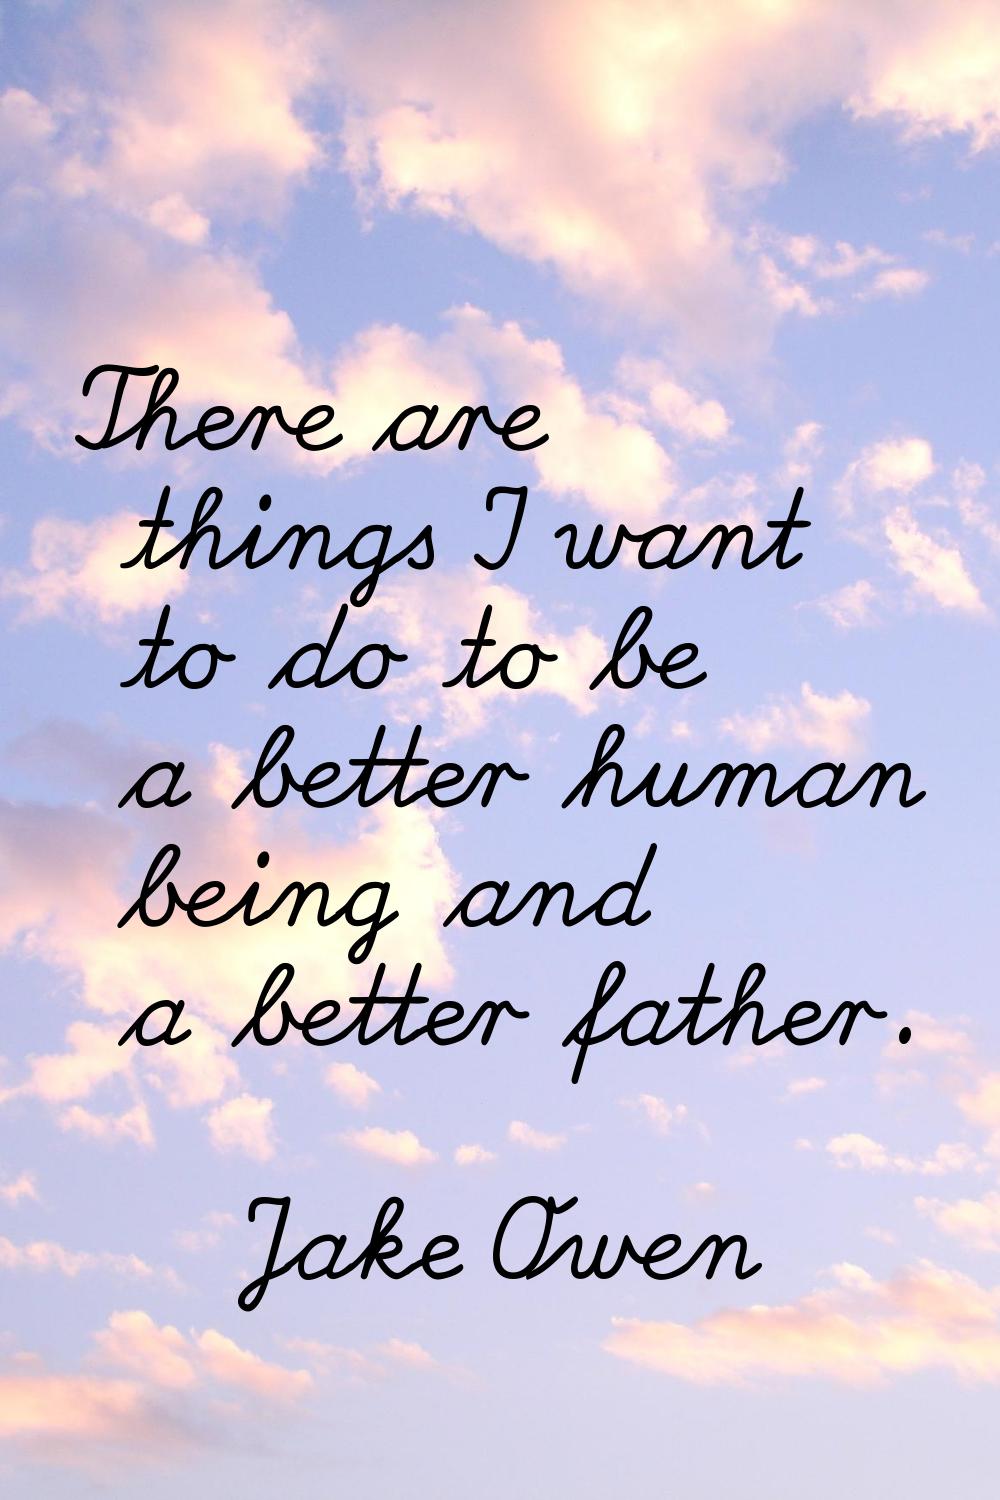 There are things I want to do to be a better human being and a better father.